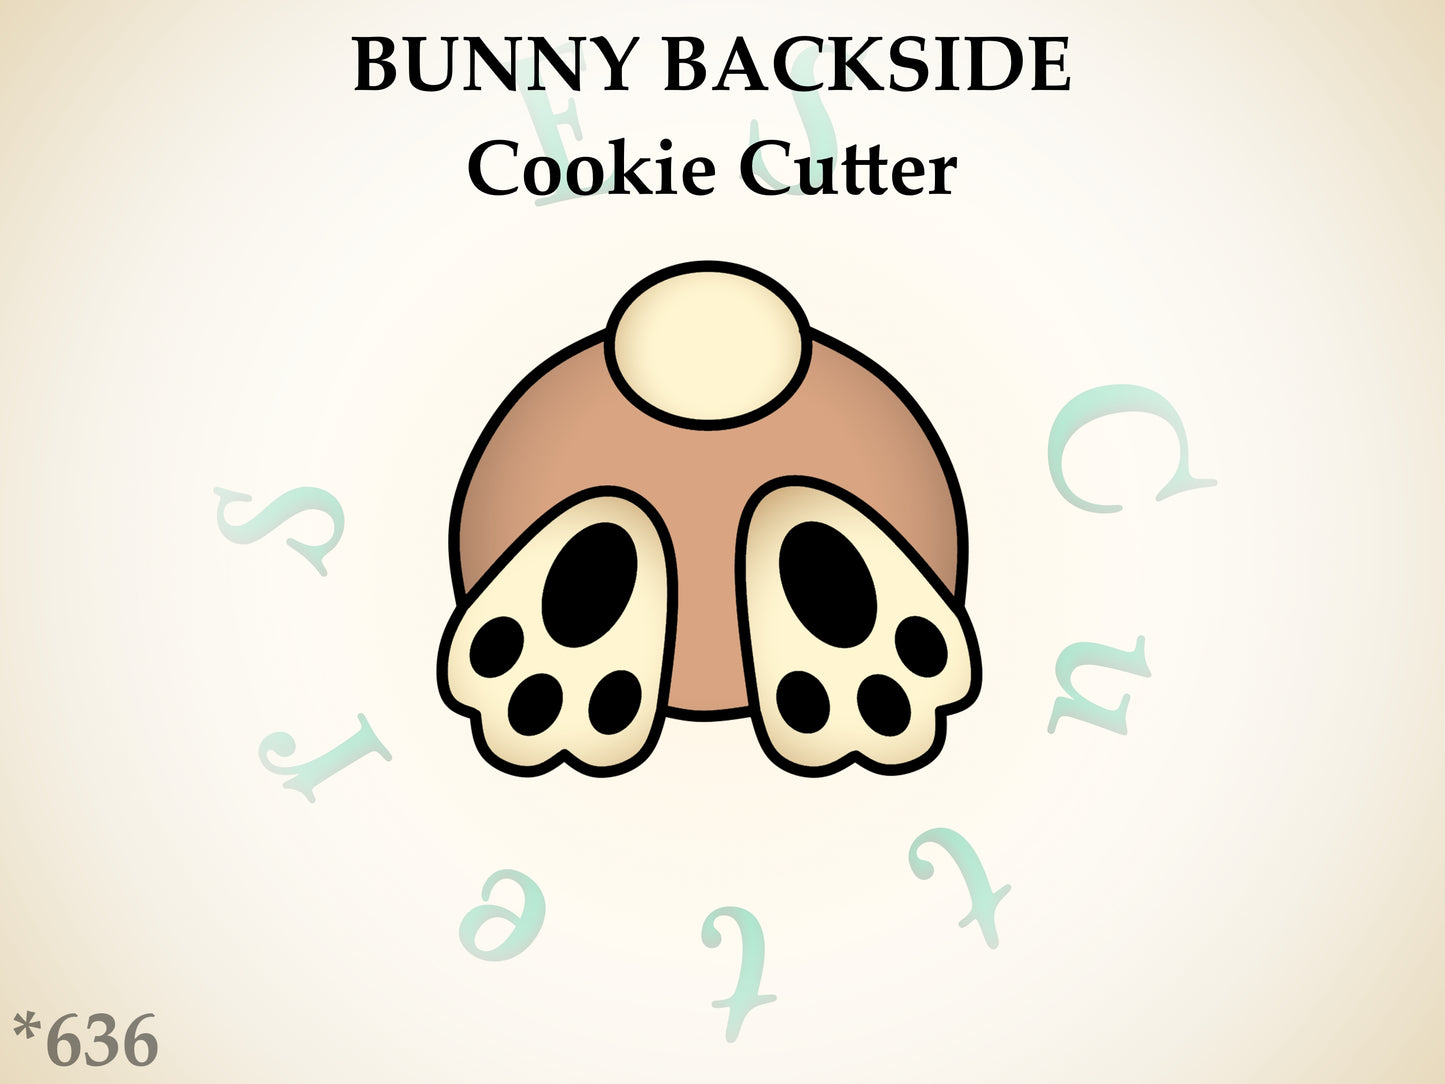 636* Bunny backside cookie cutter